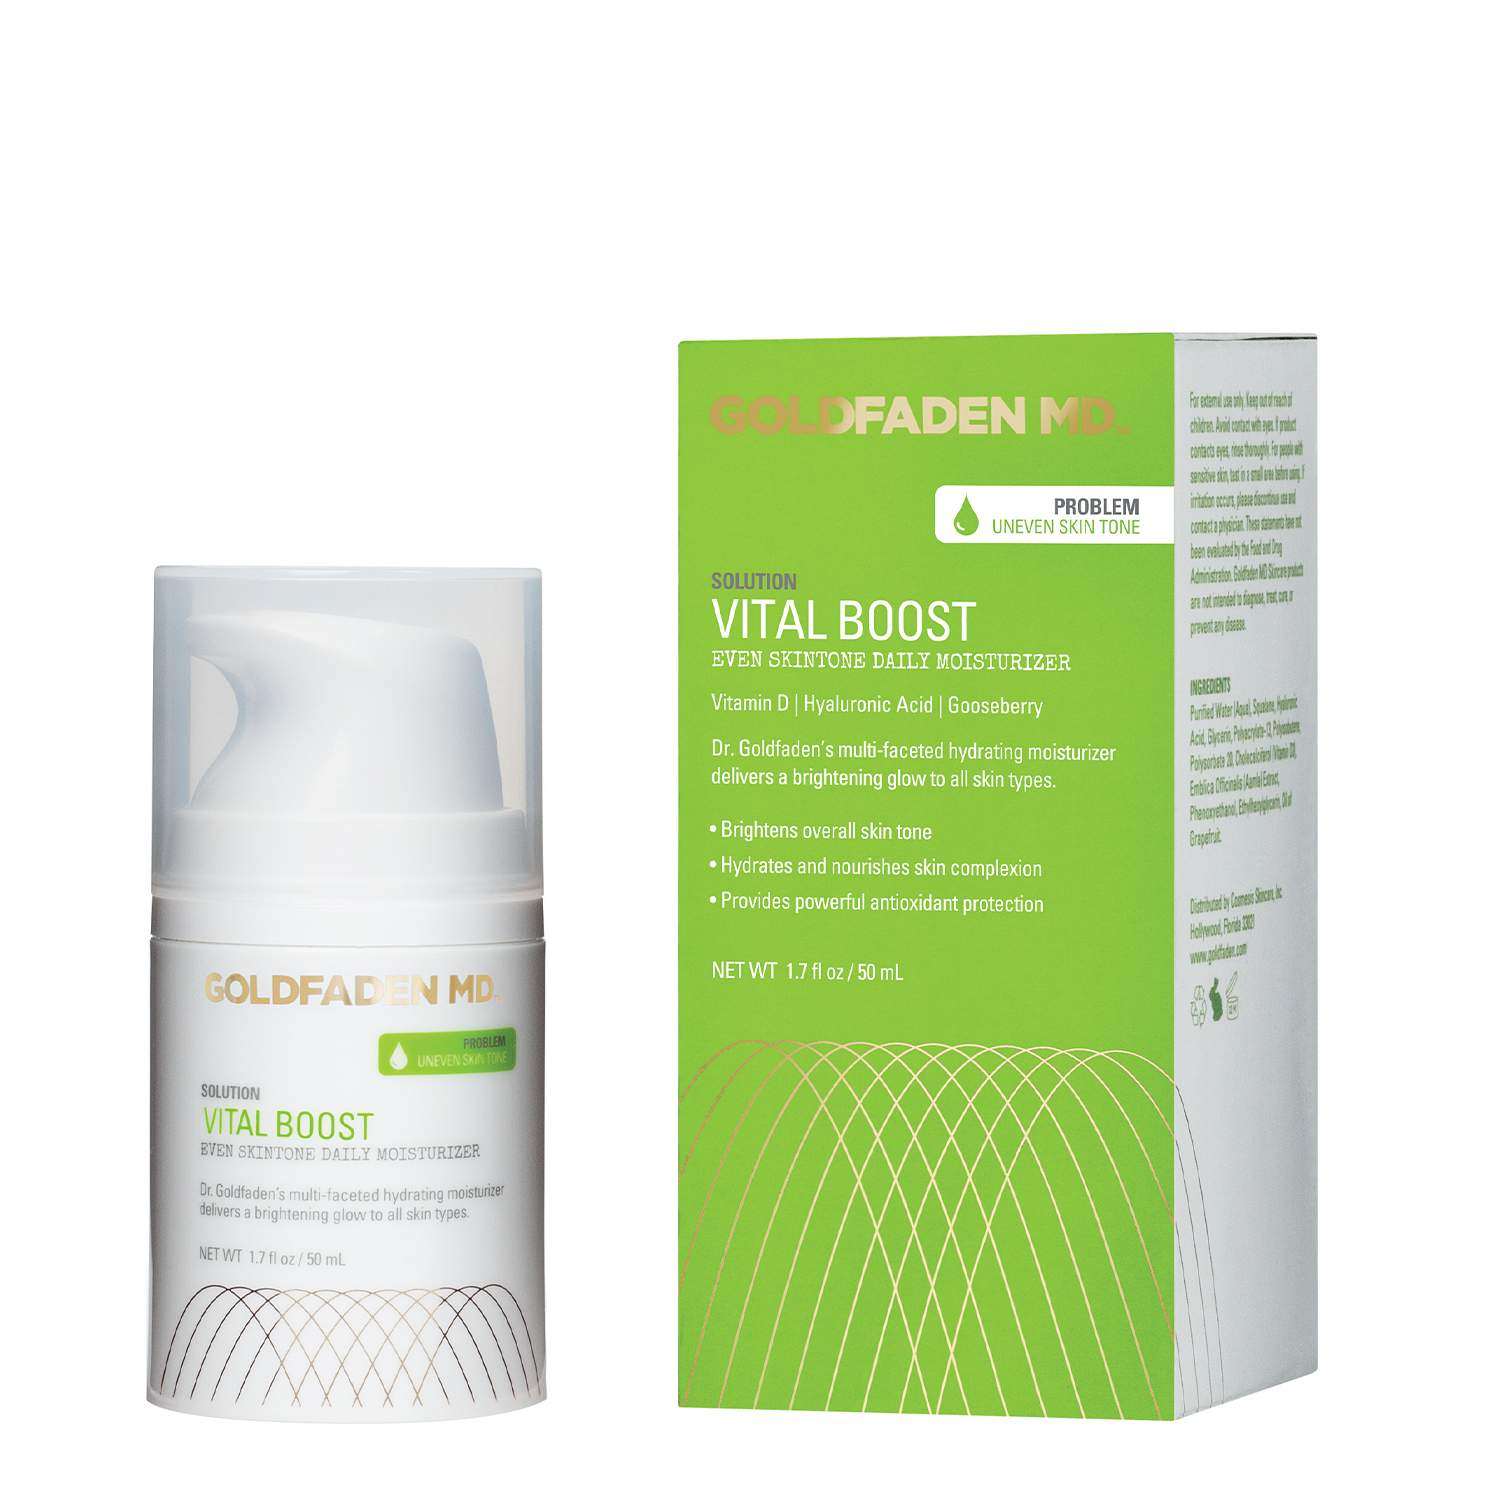 Goldfaden MD Vital Boost Even Skintone Daily Moisturizer Goldfaden MD Vital Boost Even Skintone Daily Moisturizer 1